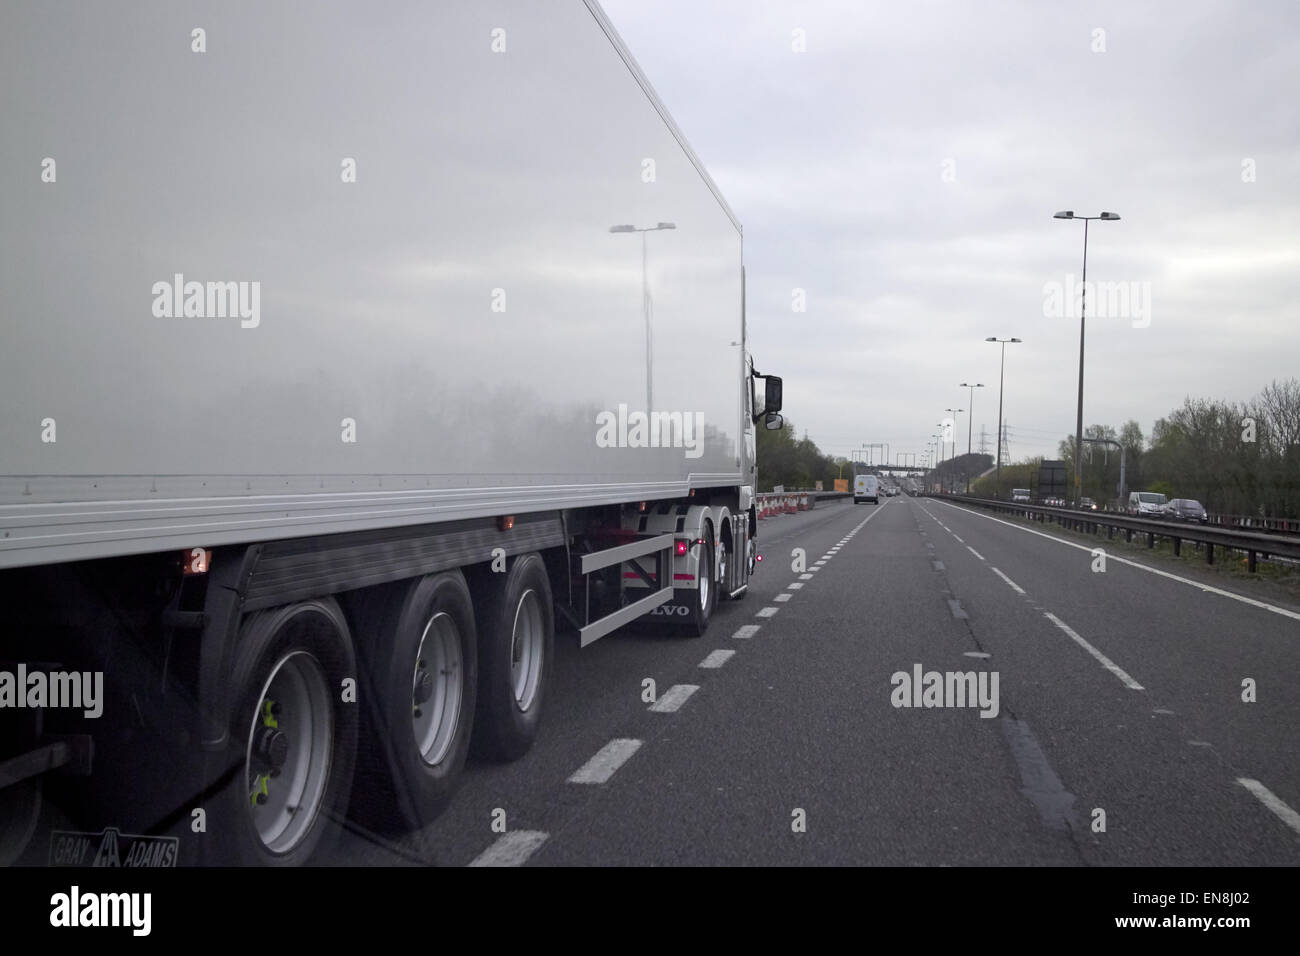 overtaking articulated lorry truck on the m6 motorway england uk Stock Photo